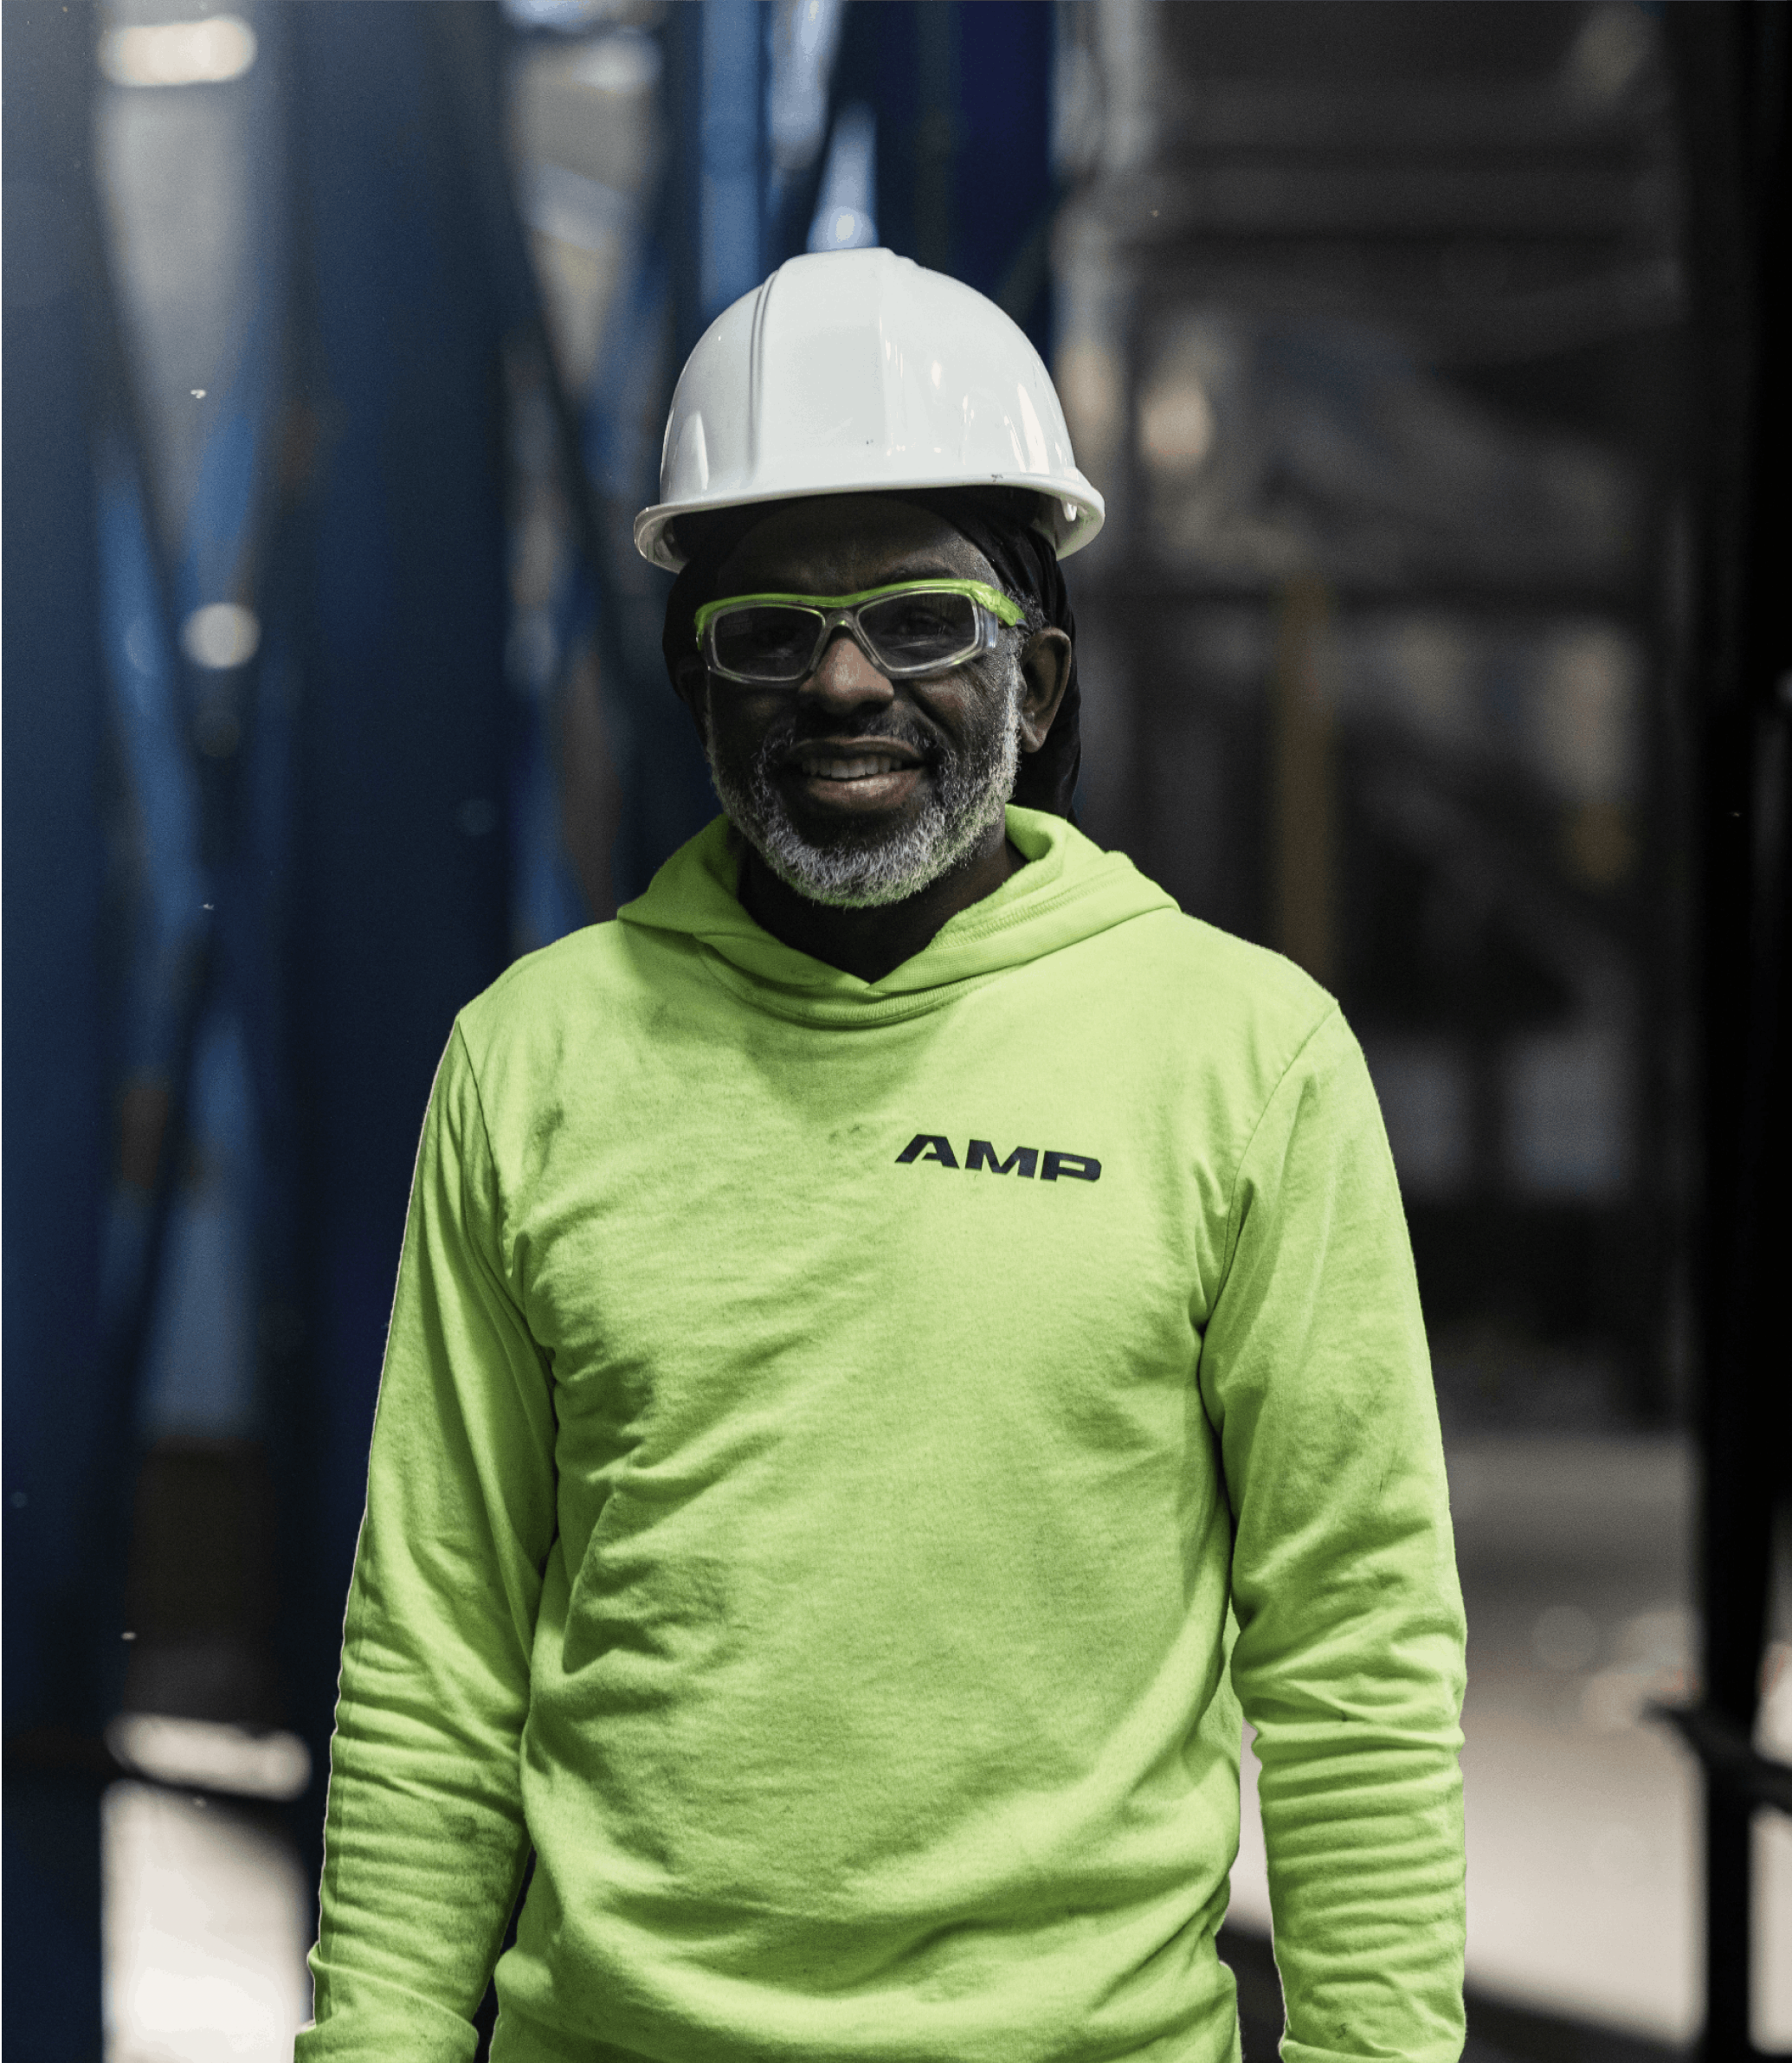 A portrait of a waste facility employee, smiling and wearing AMP gear.